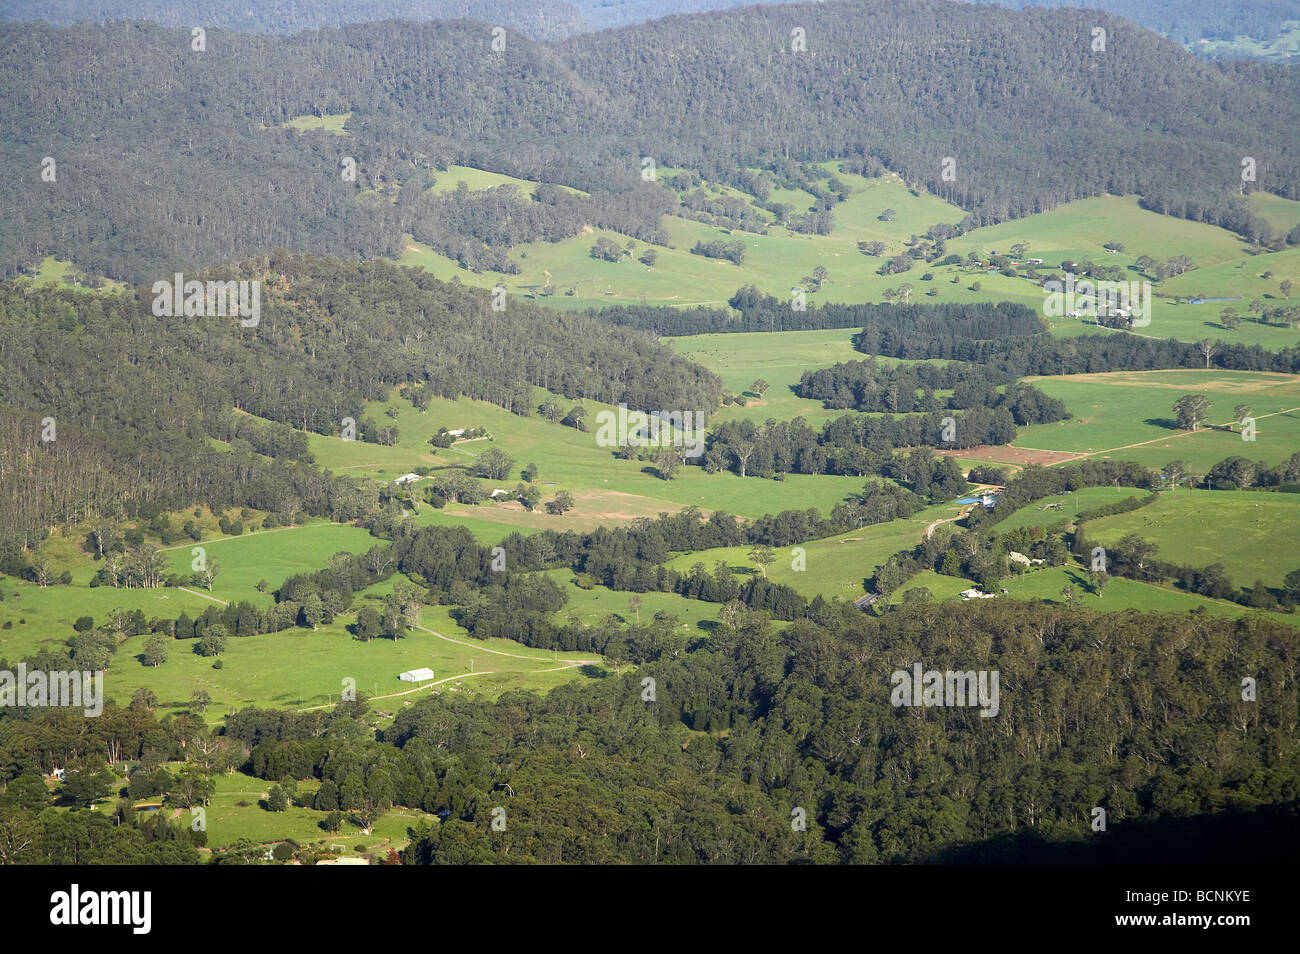 View over Kangaroo Valley from Manning Lookout Southern Highlands New South Wales Australia Stock Photo